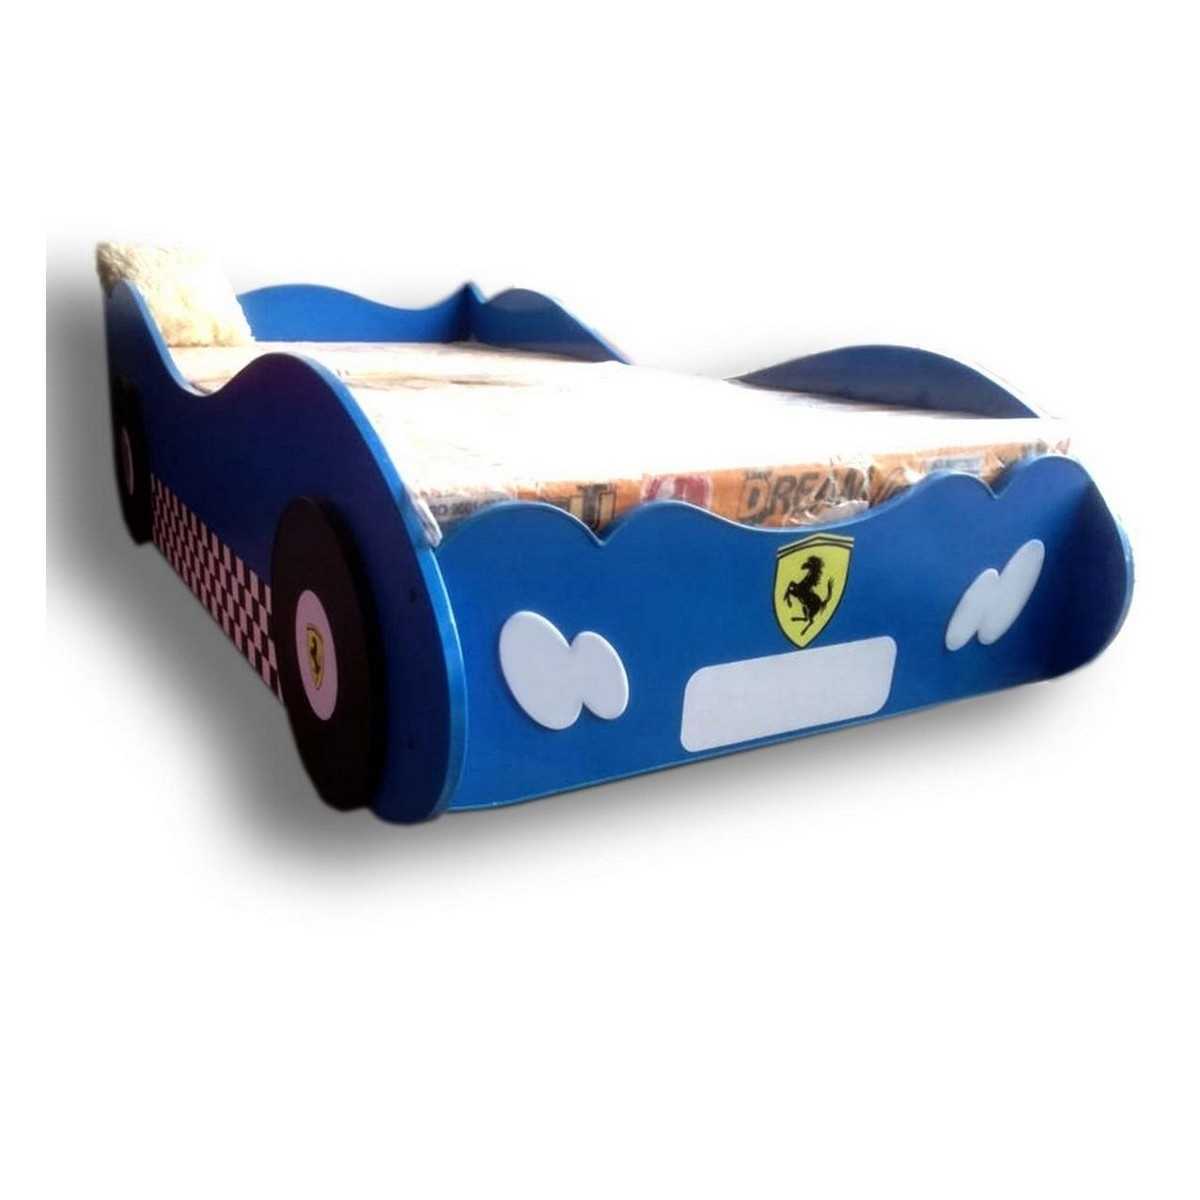 Boys electrical car bed - brand new condition